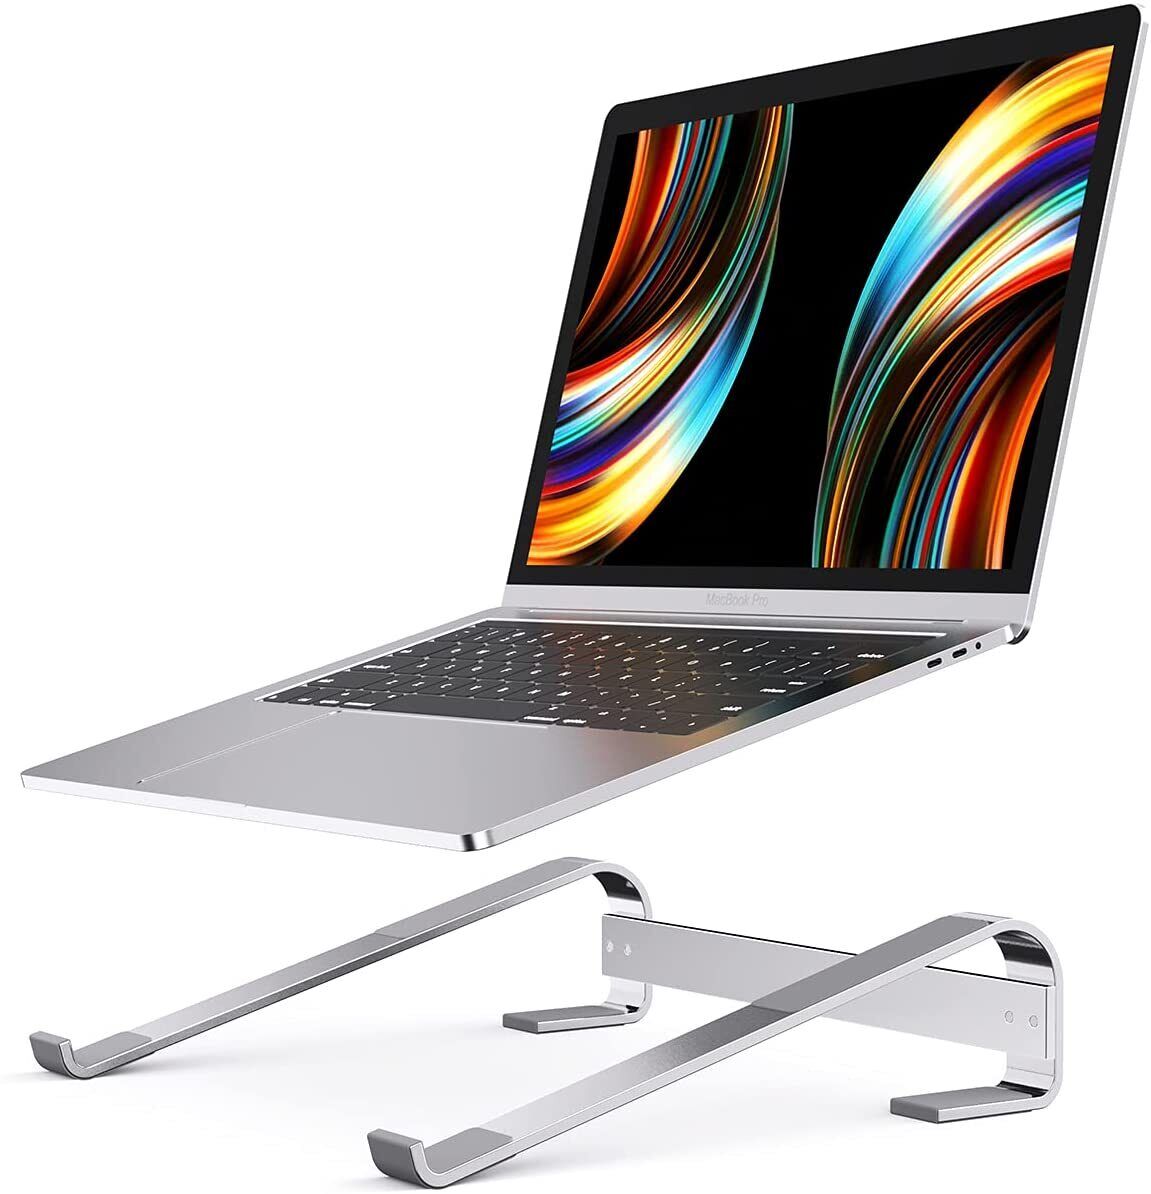 FRUITFUL Portable Laptop Stand Holder Aluminium Laptop Mount Ergonomic Computer Stand Compatible with MacBook Laptops 10-17"- Silver